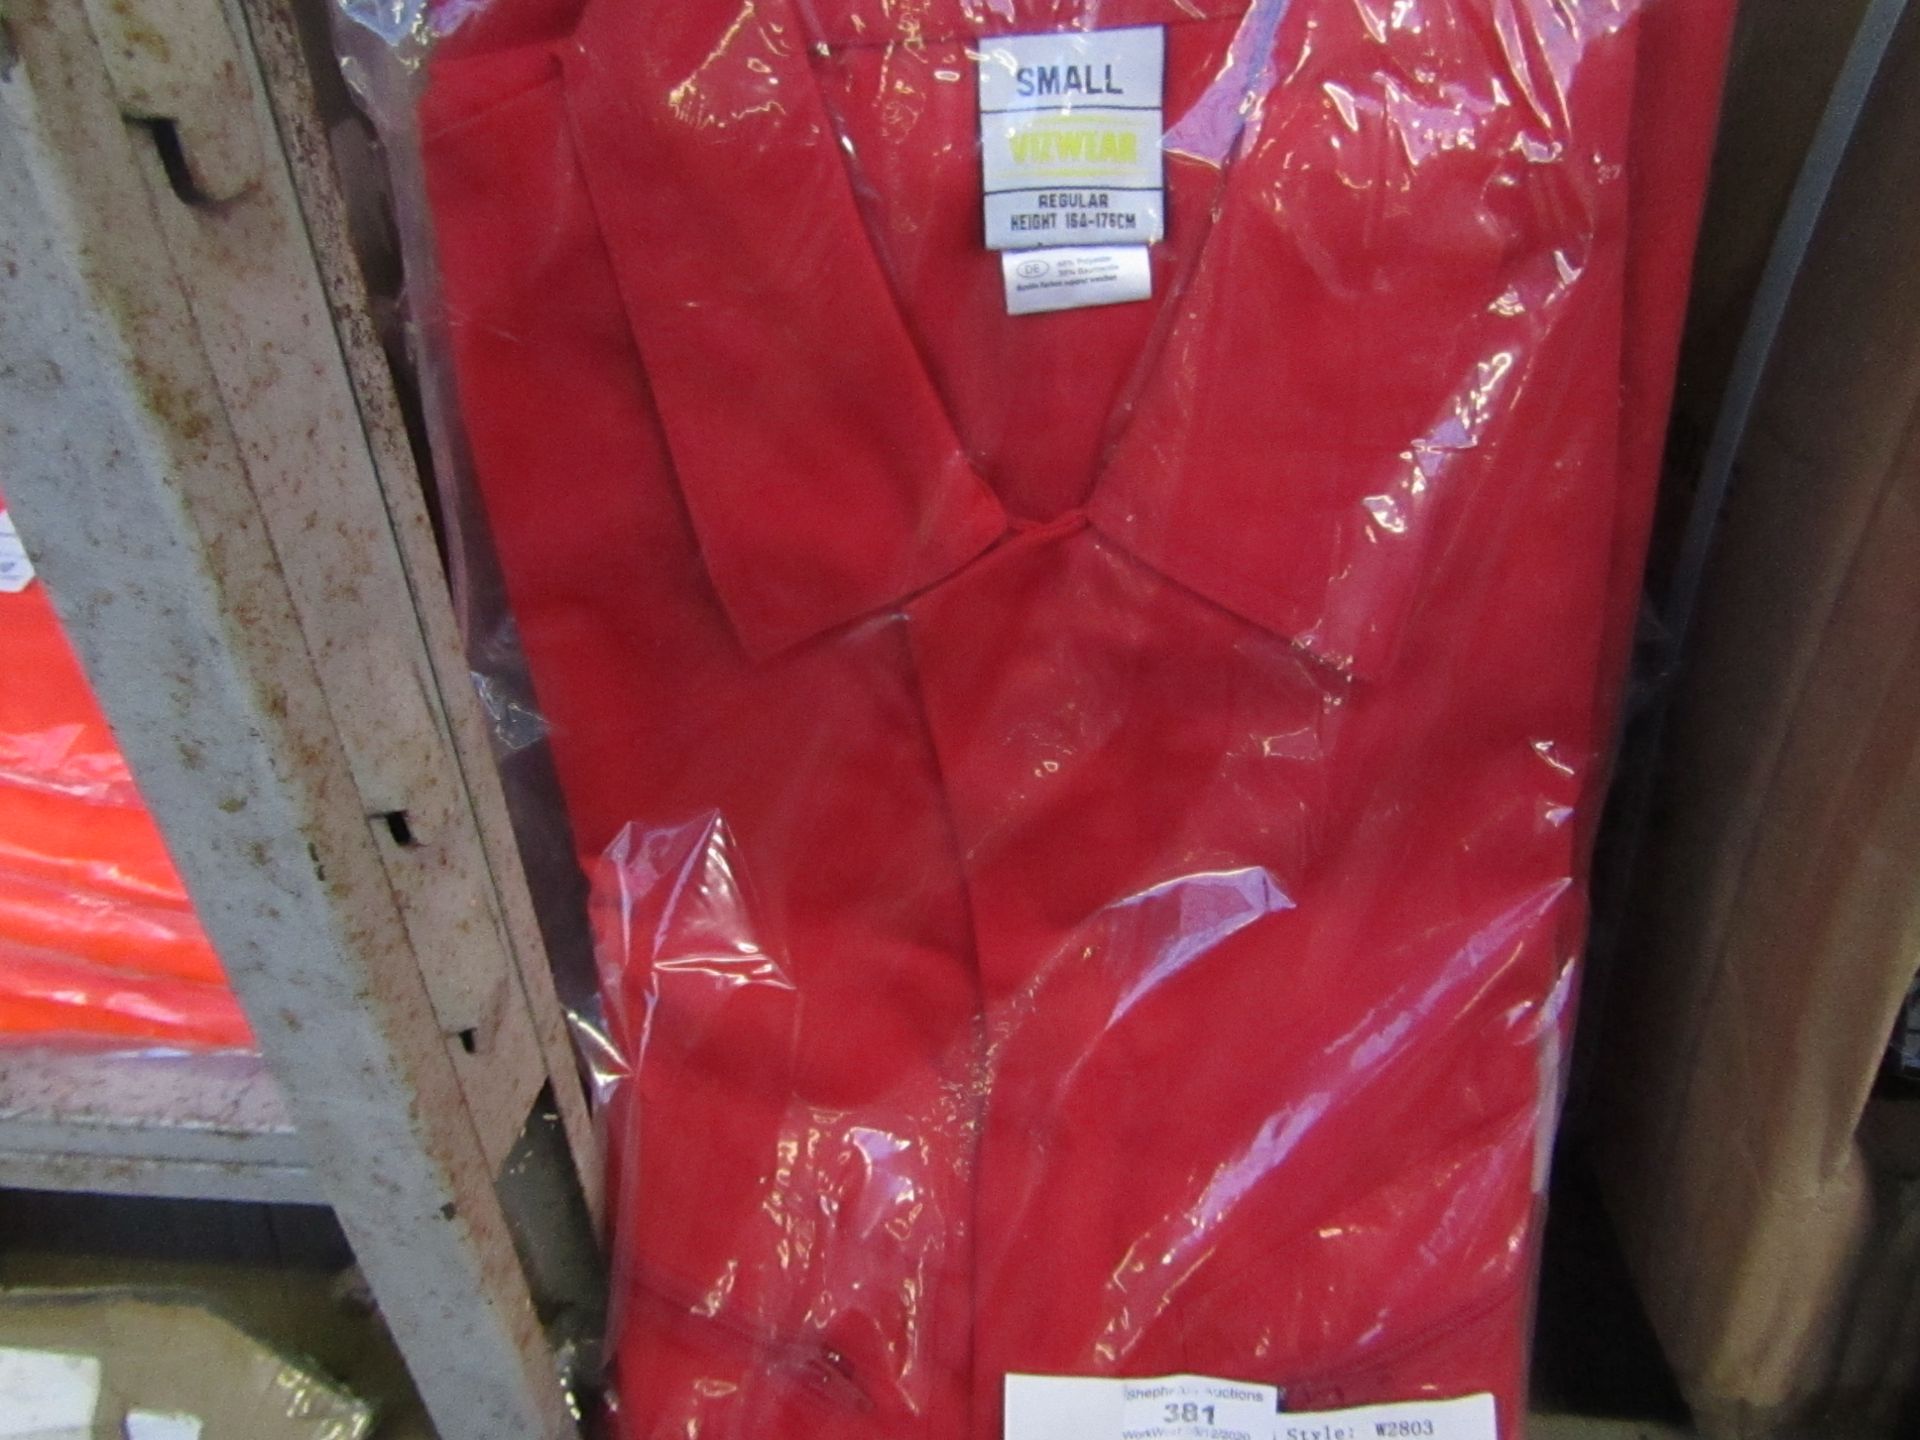 2x Black Knight - Red Boilersuit - Size Small - Unused & Packaged.